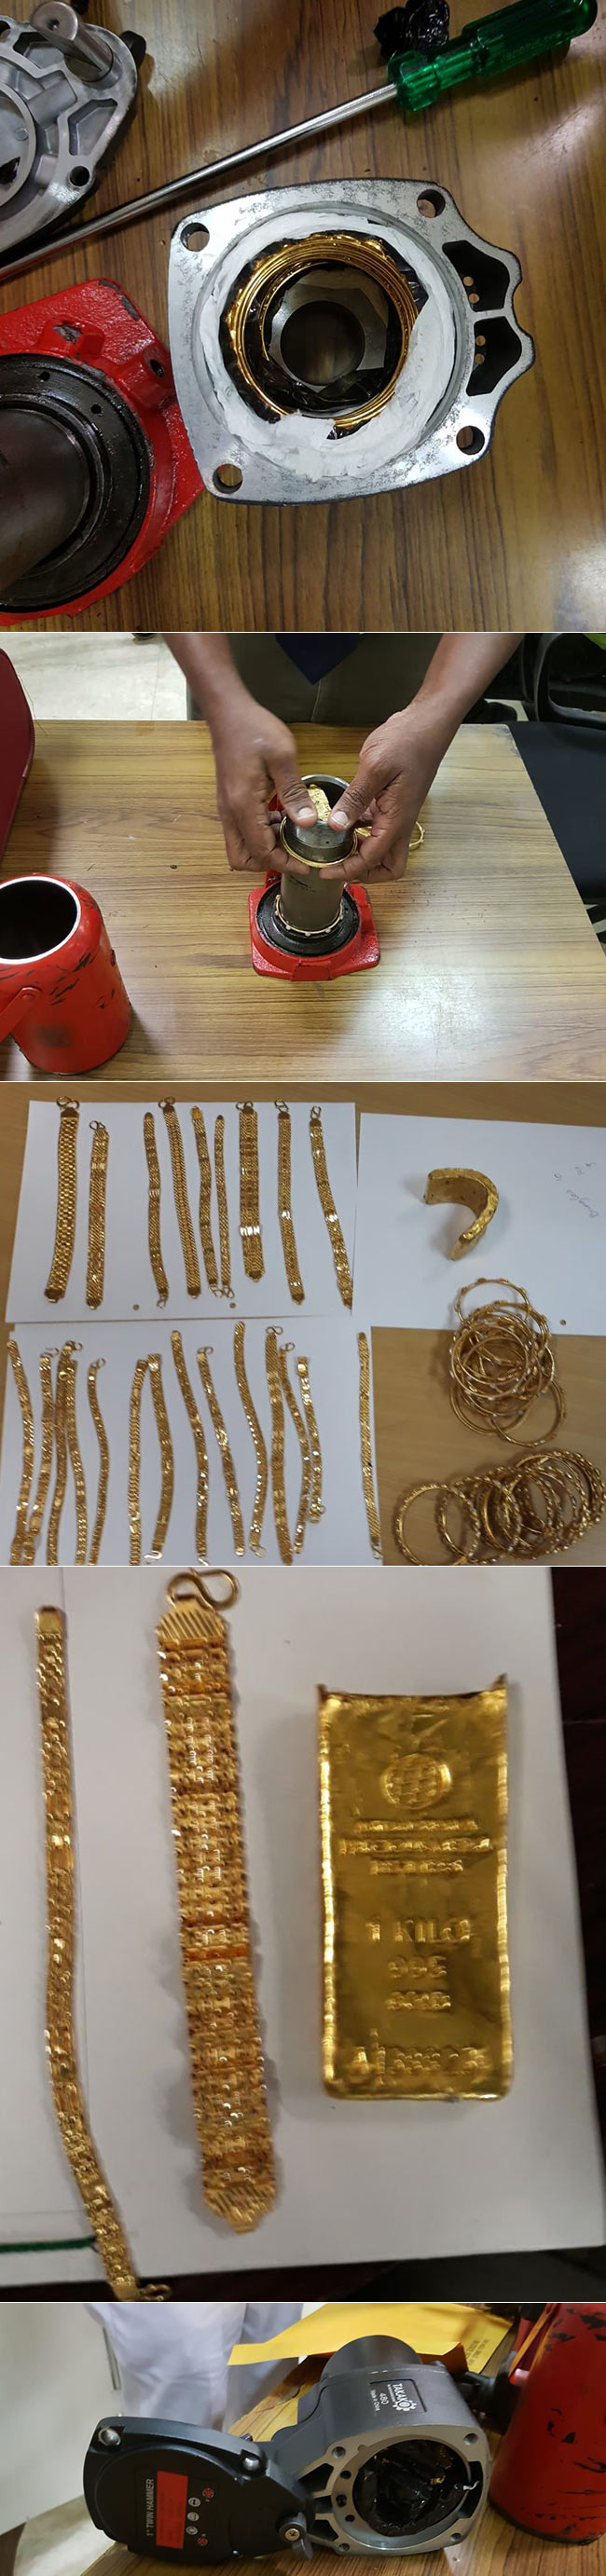 Indian arrested with gold worth over Rs 19 million in vehicle jack